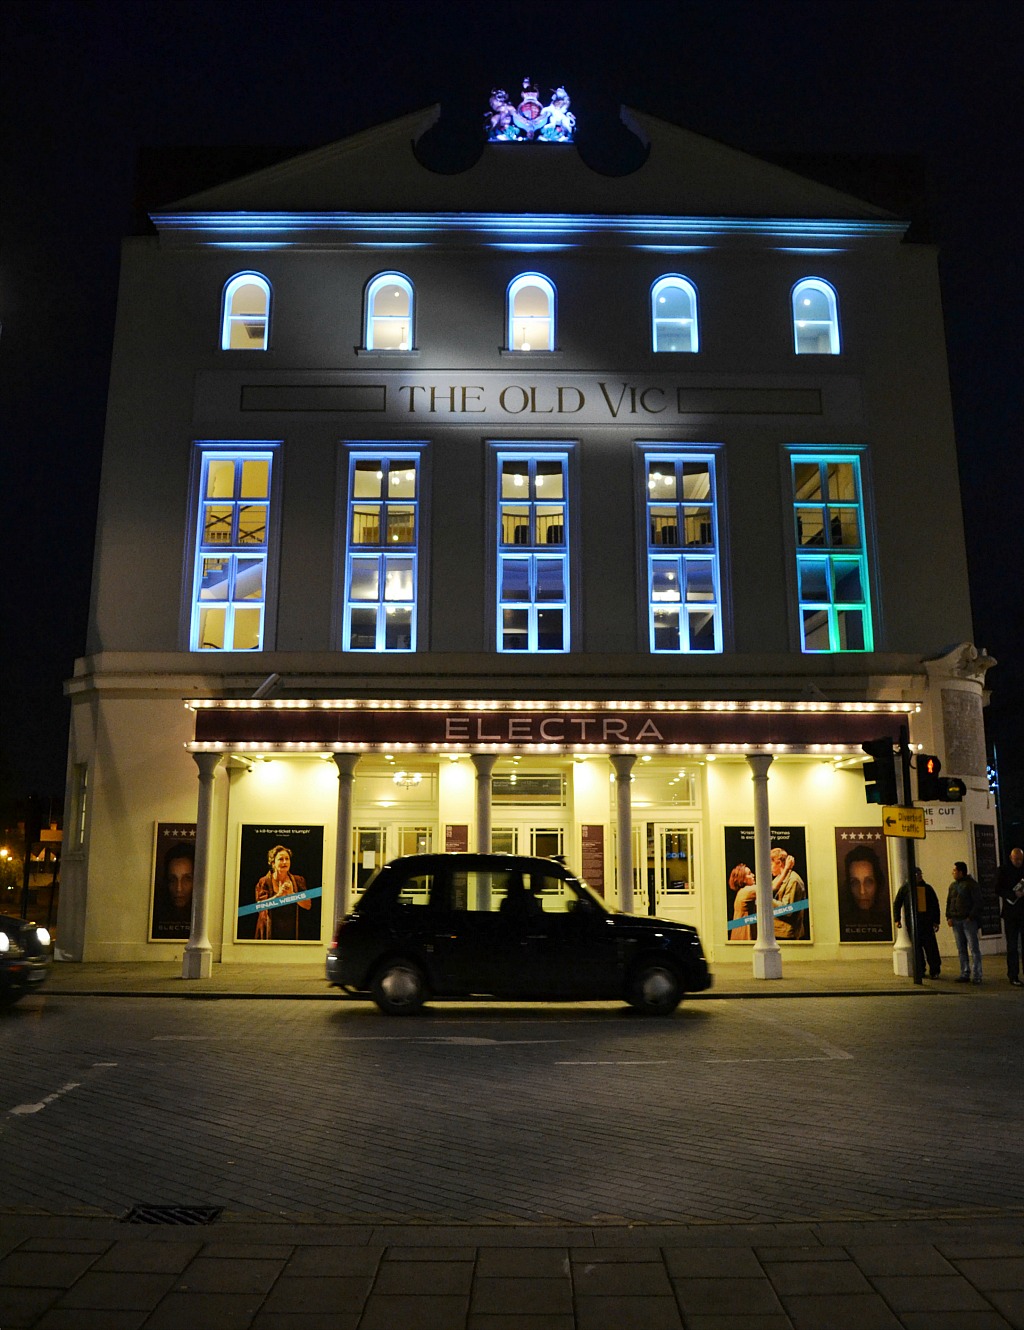 The old vic